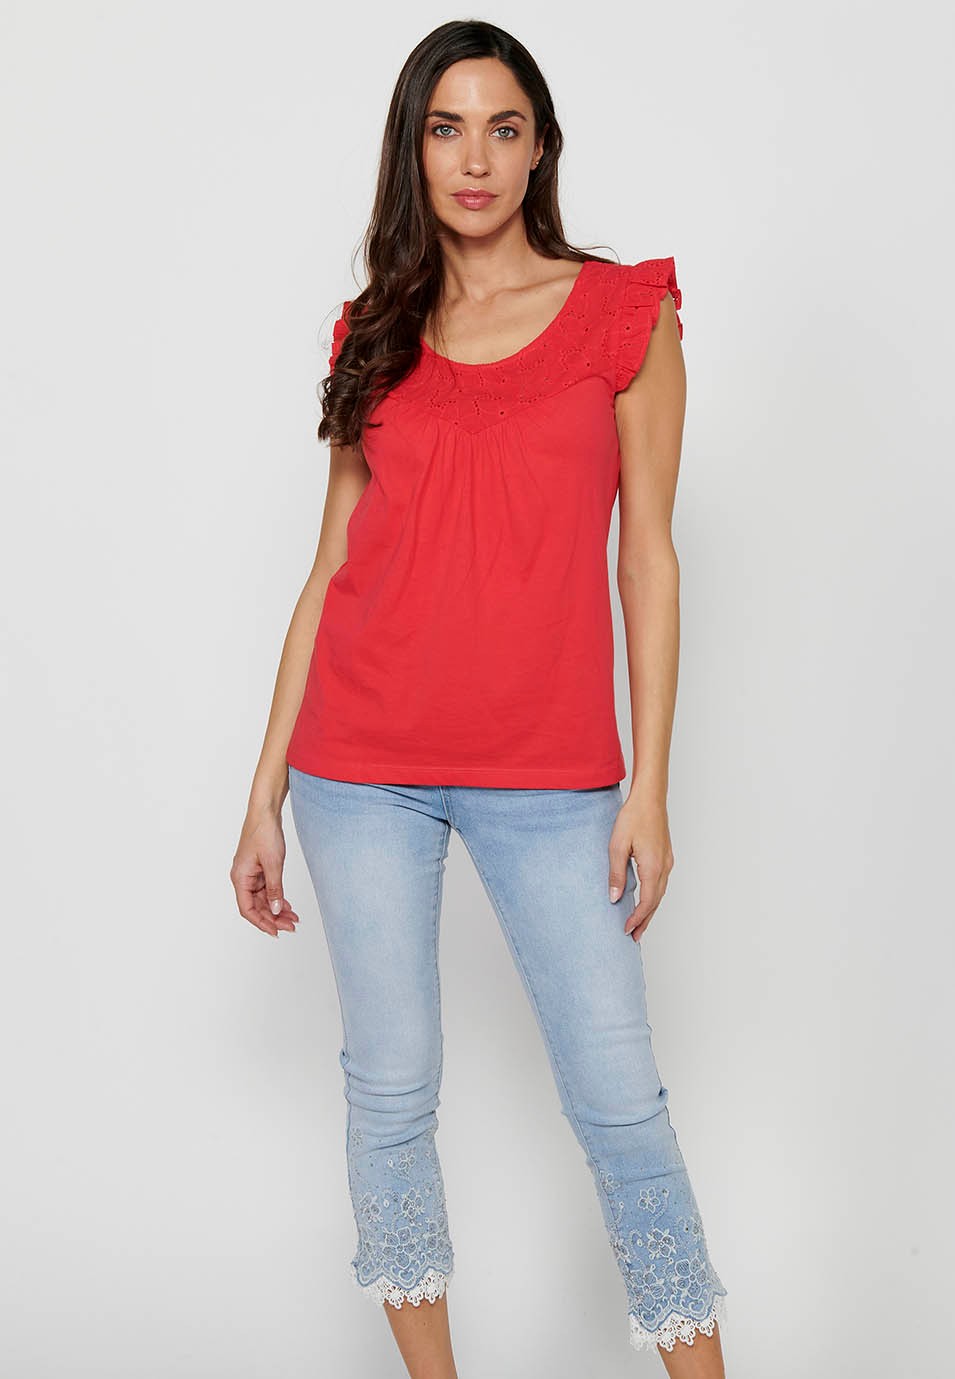 Women's Coral Color Short Sleeve Round Neck Ruffle Shoulder T-shirt